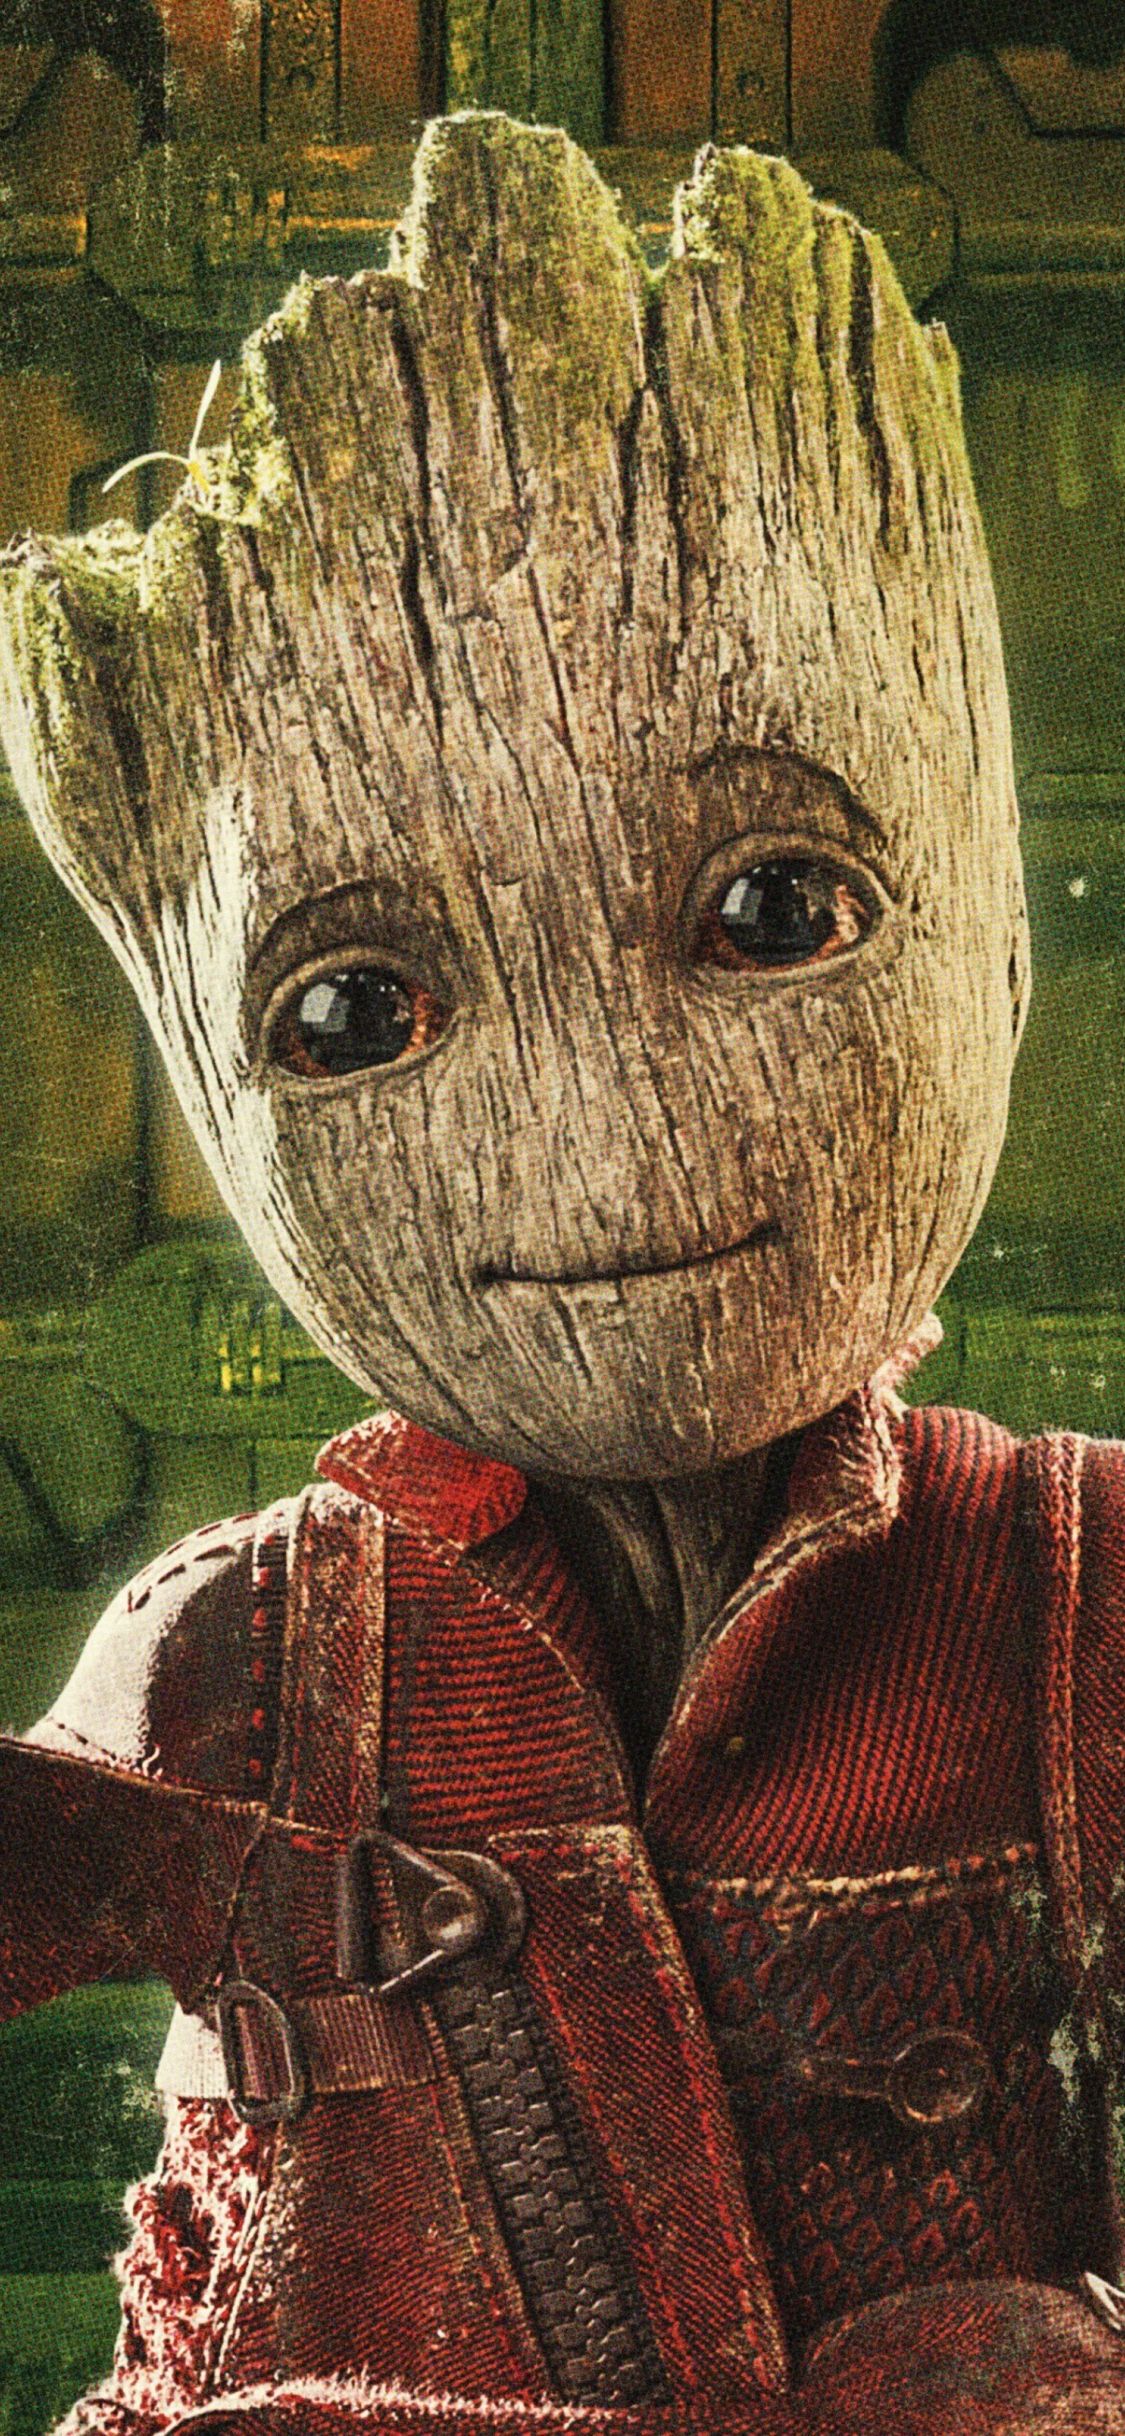 Download 1125x2436 wallpaper baby groot, guardians of the galaxy